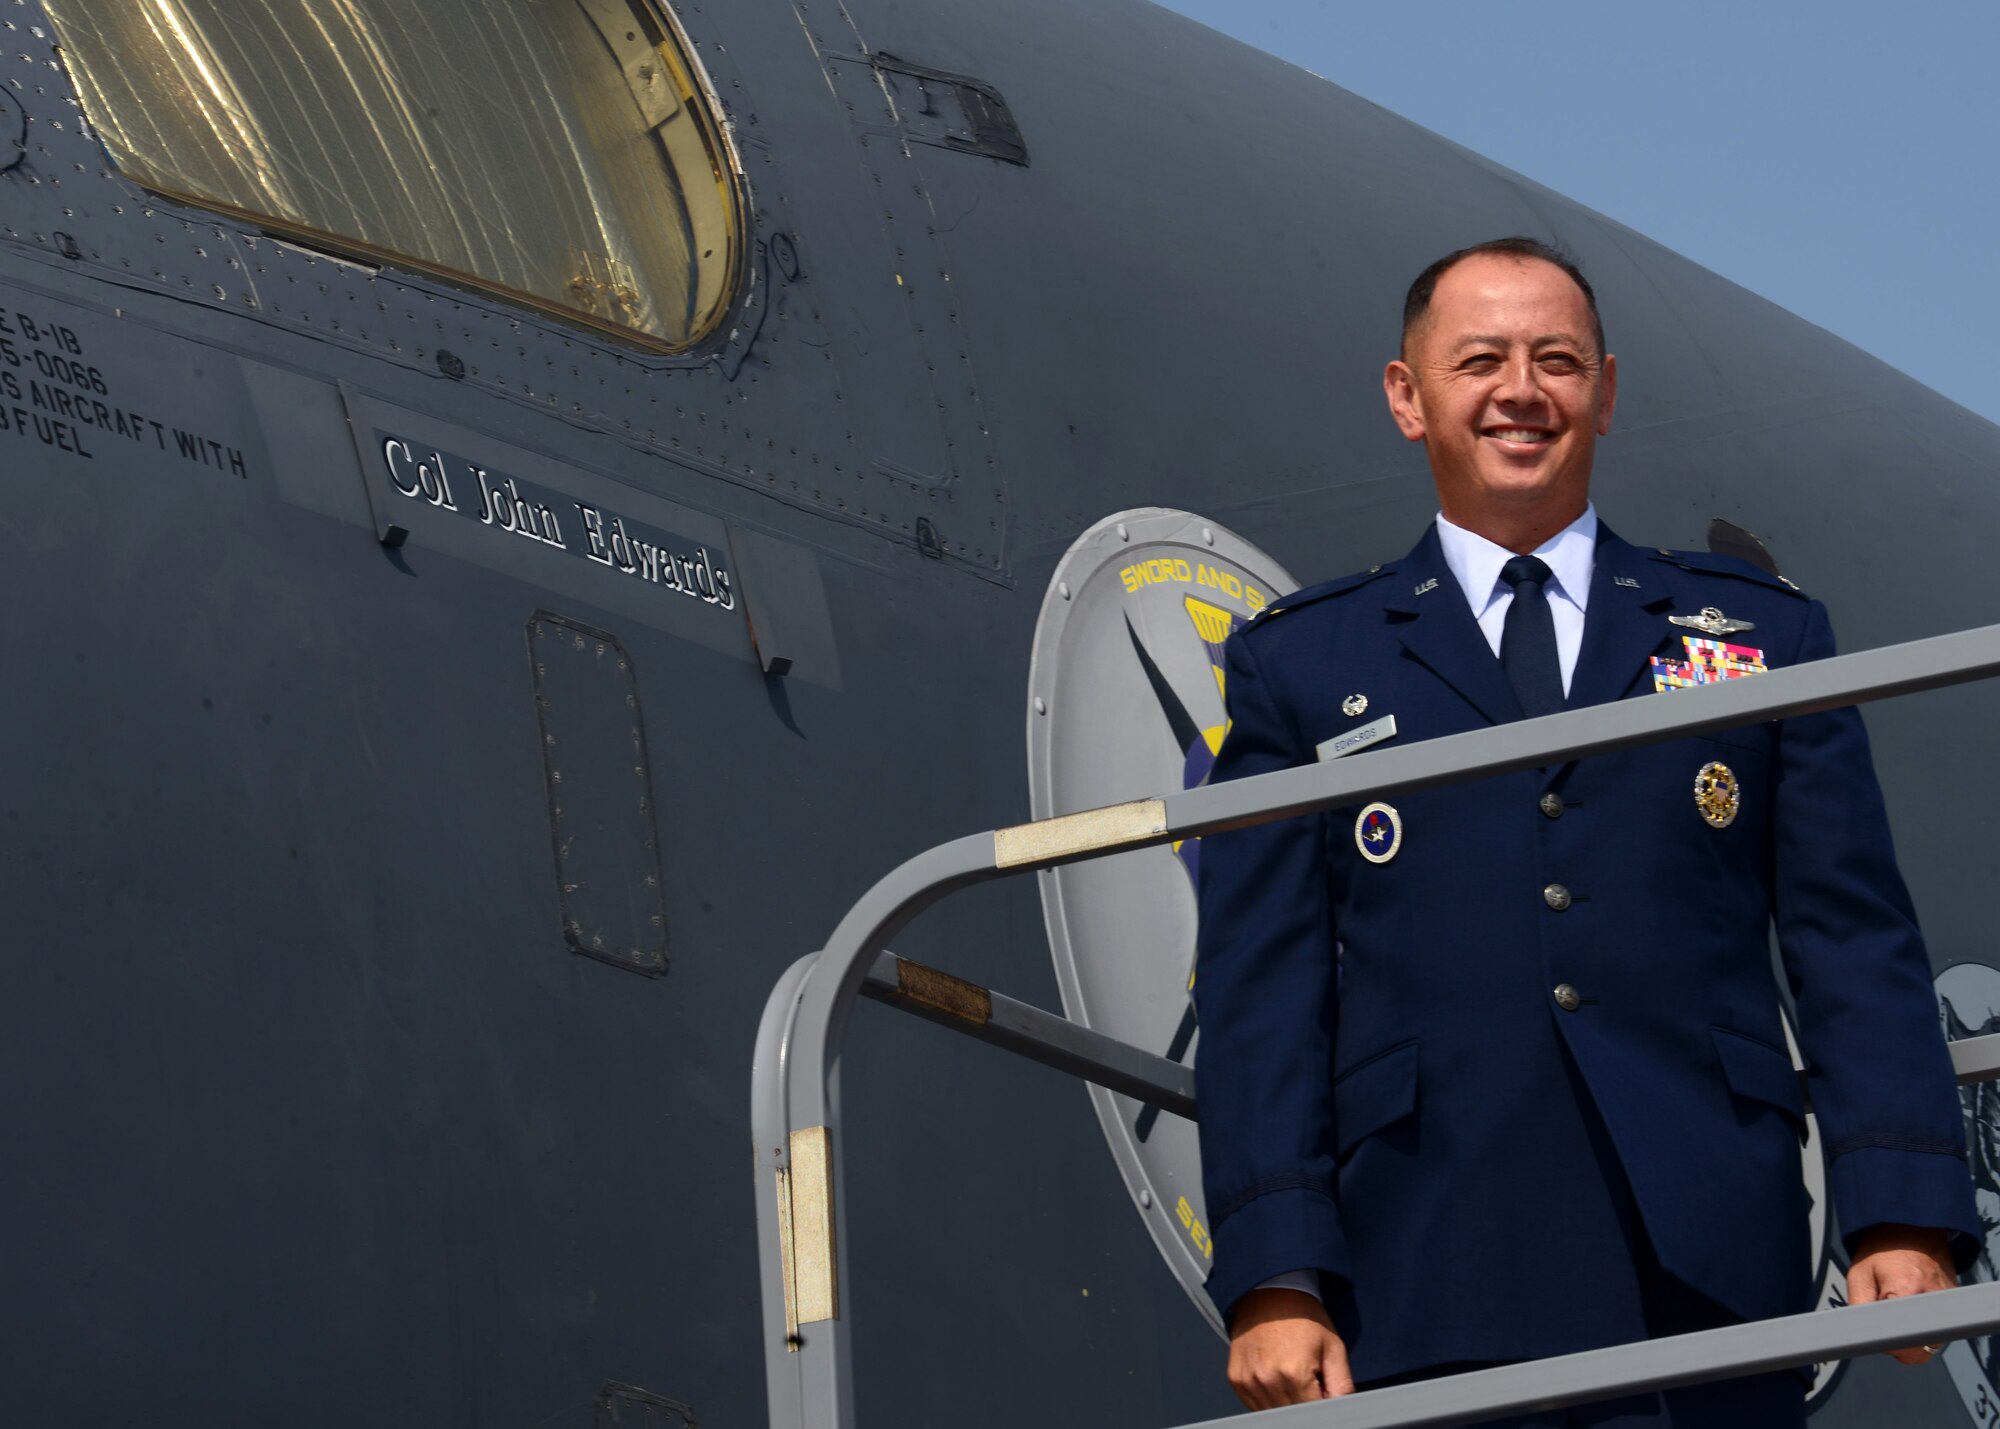 Col. John R. Edwards, commander of the 28th Bomb Wing, unveils his name on a B-1 bomber at Ellsworth Air Force Base